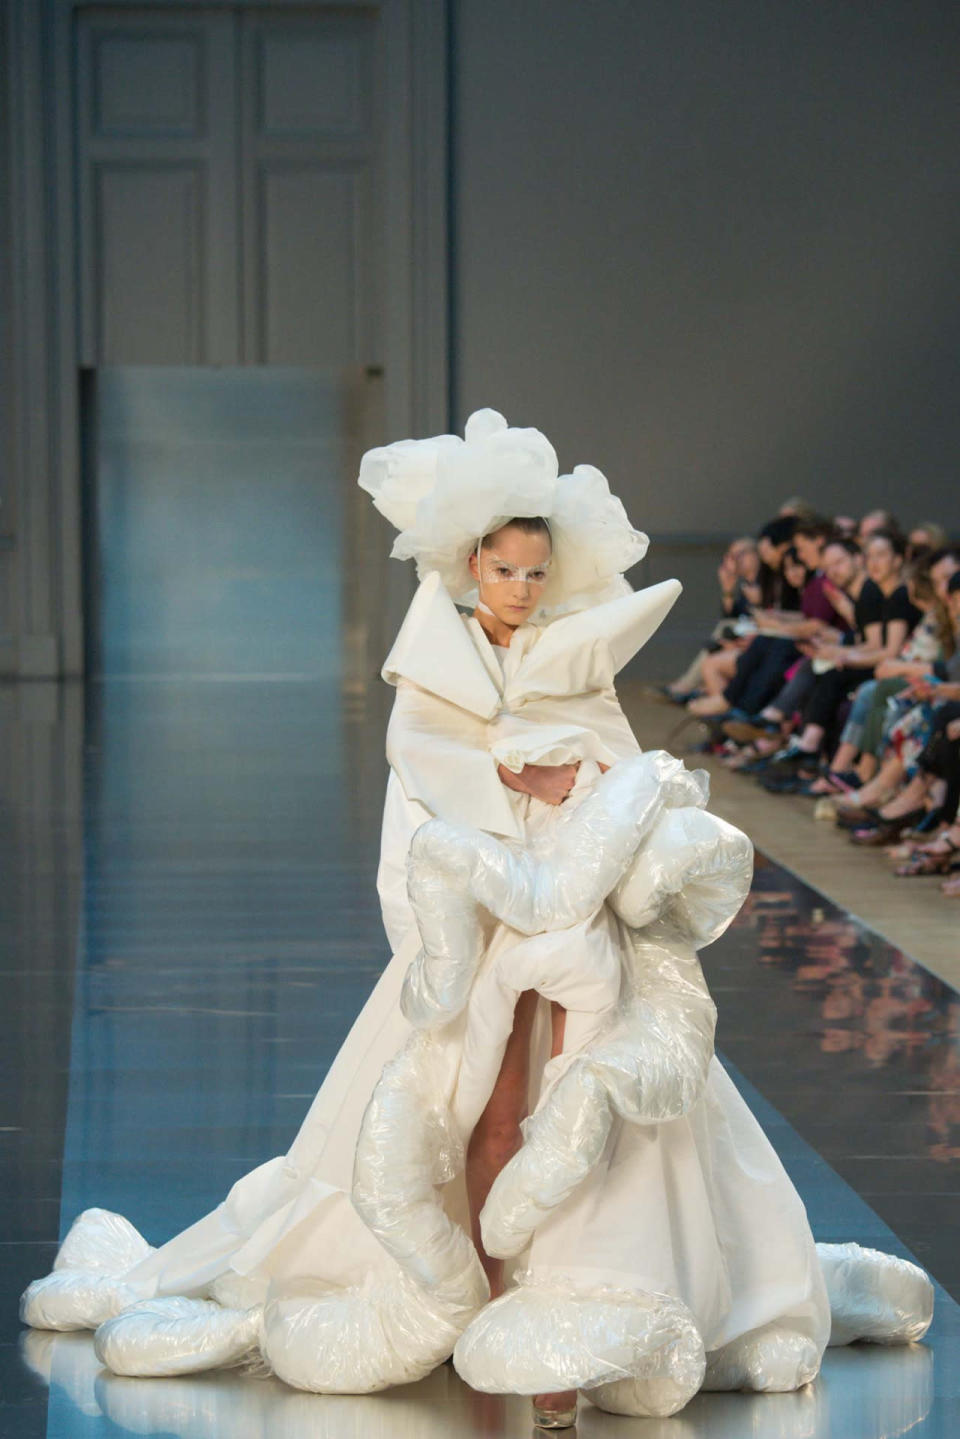 <p>John Galliano’s second couture collection for the house of Martin Margiela showcased the designer’s epic range and referenced Margiela’s ability to take any material and make it glamorous. Case in point: his bride who, although gorgeous, looked like she was wearing a duvet wrapped in plastic!</p>